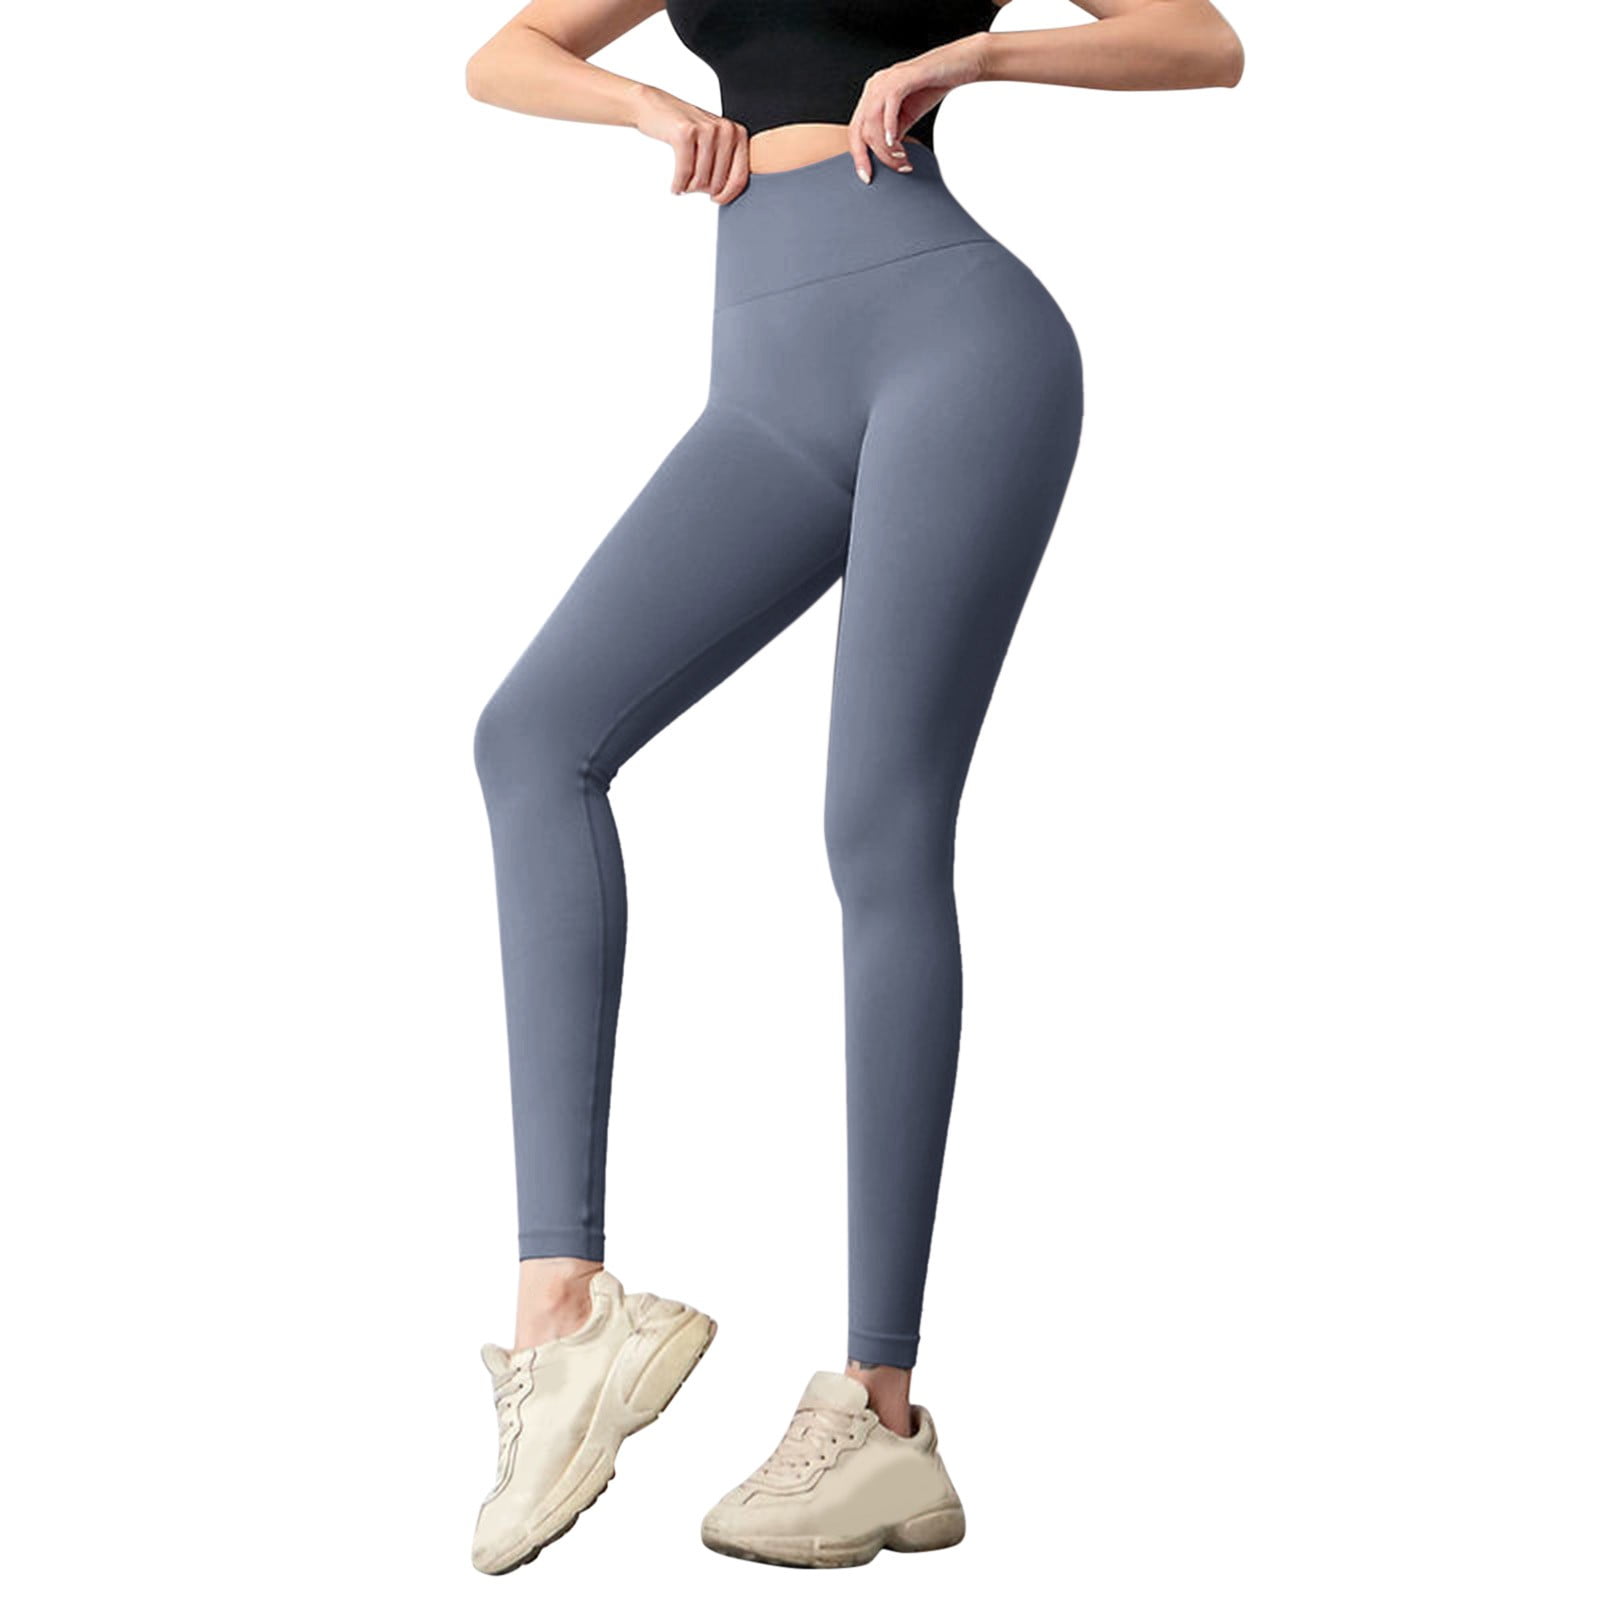 High Waisted Designer Yoga Pants For Women Knee Length Gym  Gym  Leggings With Elastic Waistband For Fitness And Outdoor Sports From  Apparel876, $11.06